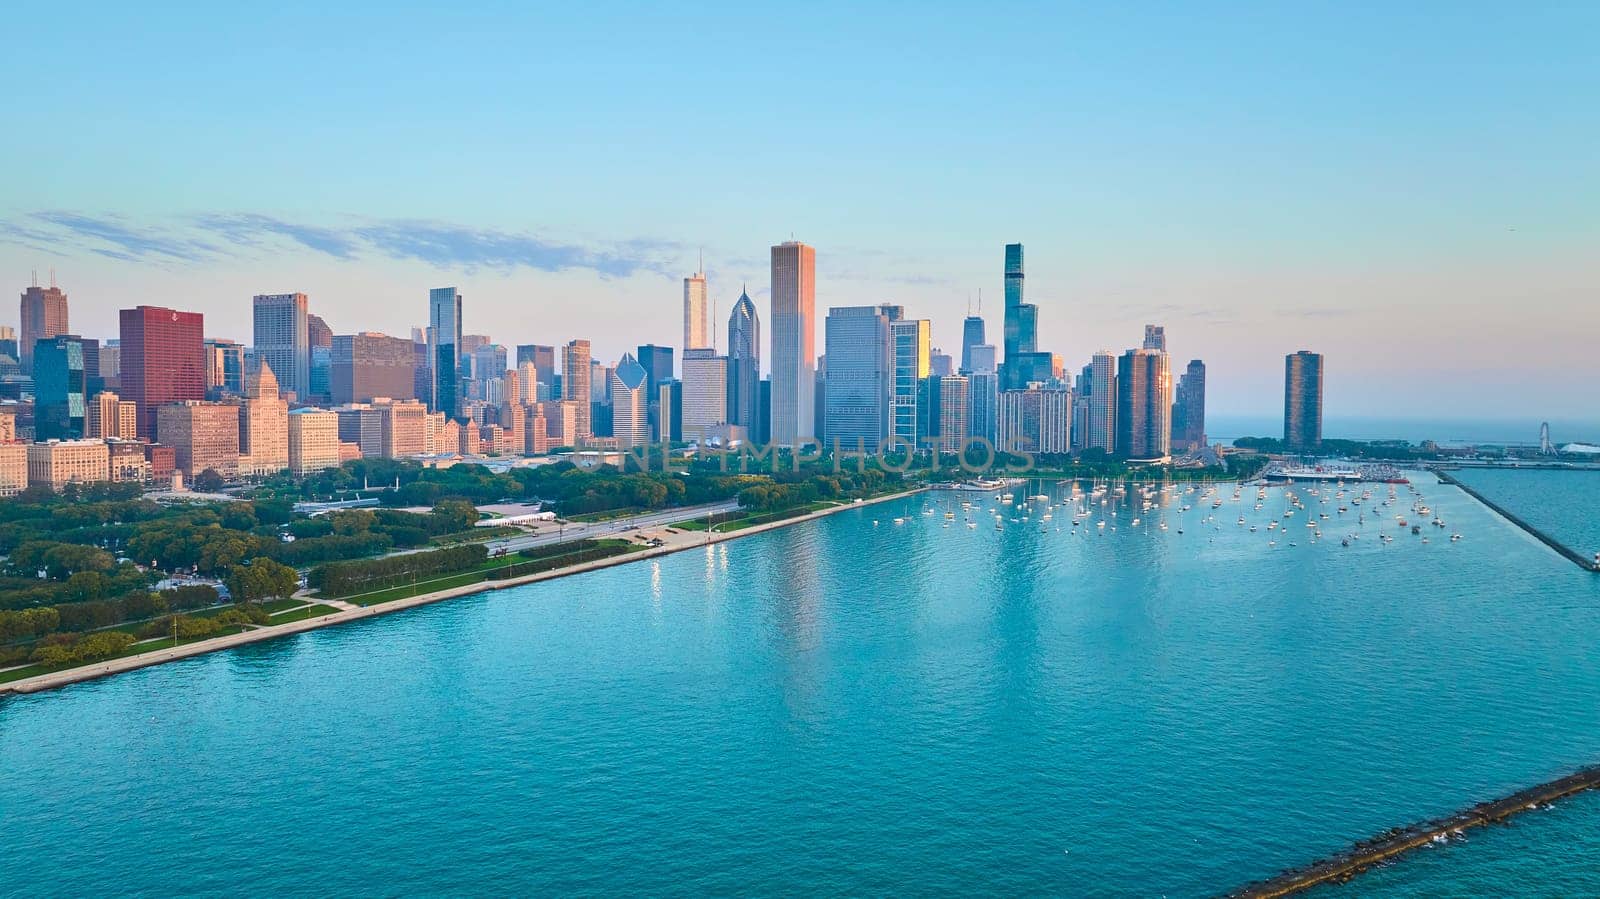 Blue harbor water, Lake Michigan aerial of Chicago coastline with skyscrapers in summer at sunrise by njproductions